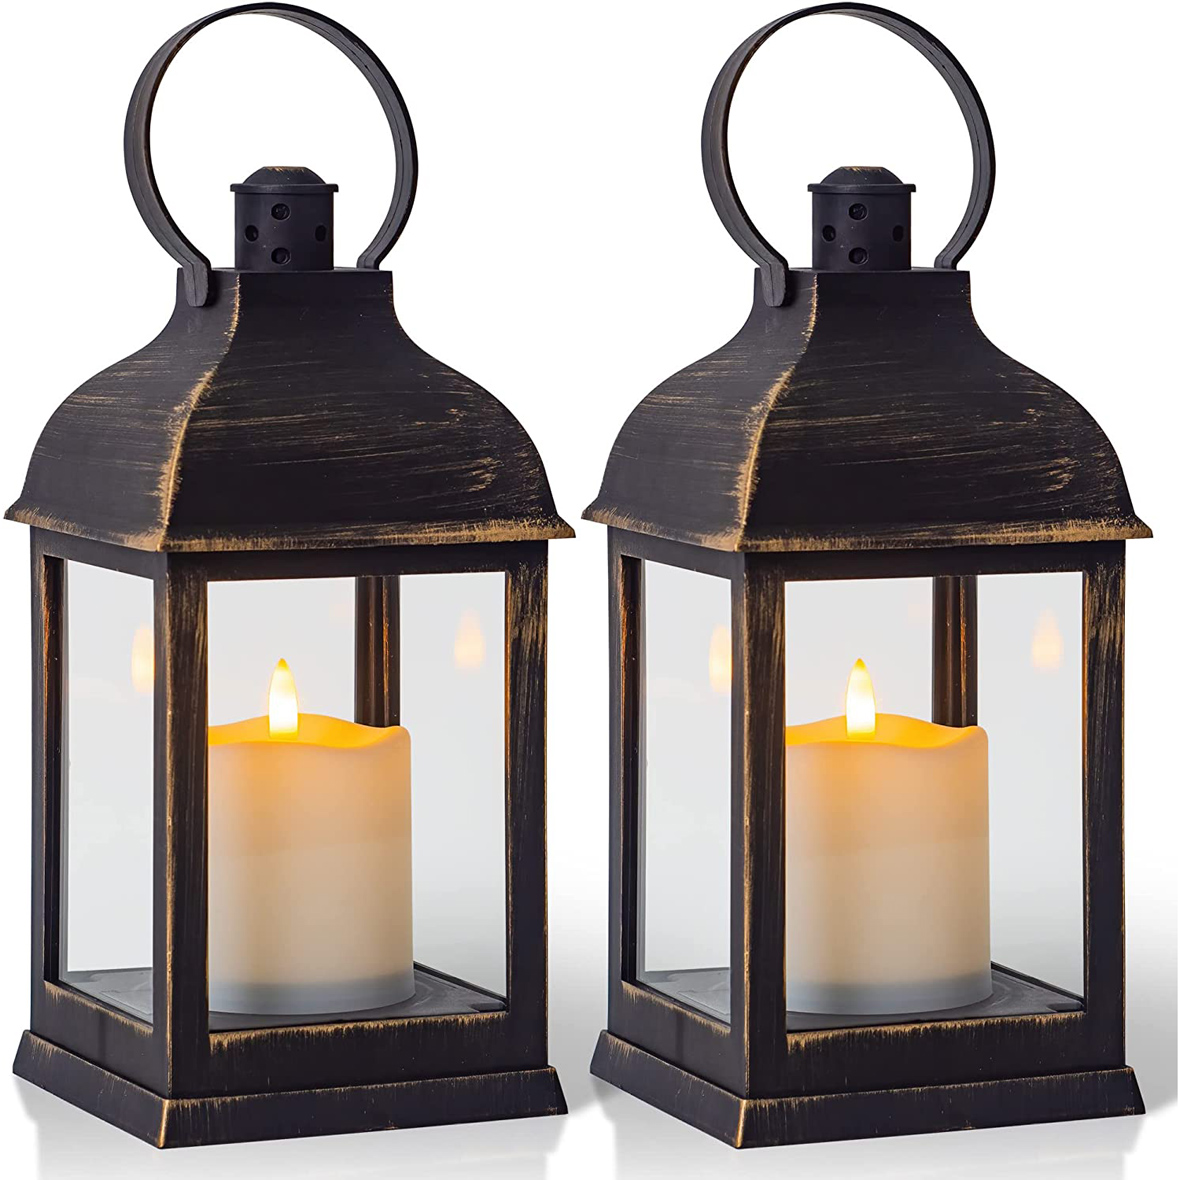 Yongmao Vintage Lantern Decorative LED Flickering Flameless Candle with Timer, Battery Powered LED Decorative Hanging Golden Brushed Black Lanterns for Indoor Outdoor Garden Yard Home Decor(2 Pack)